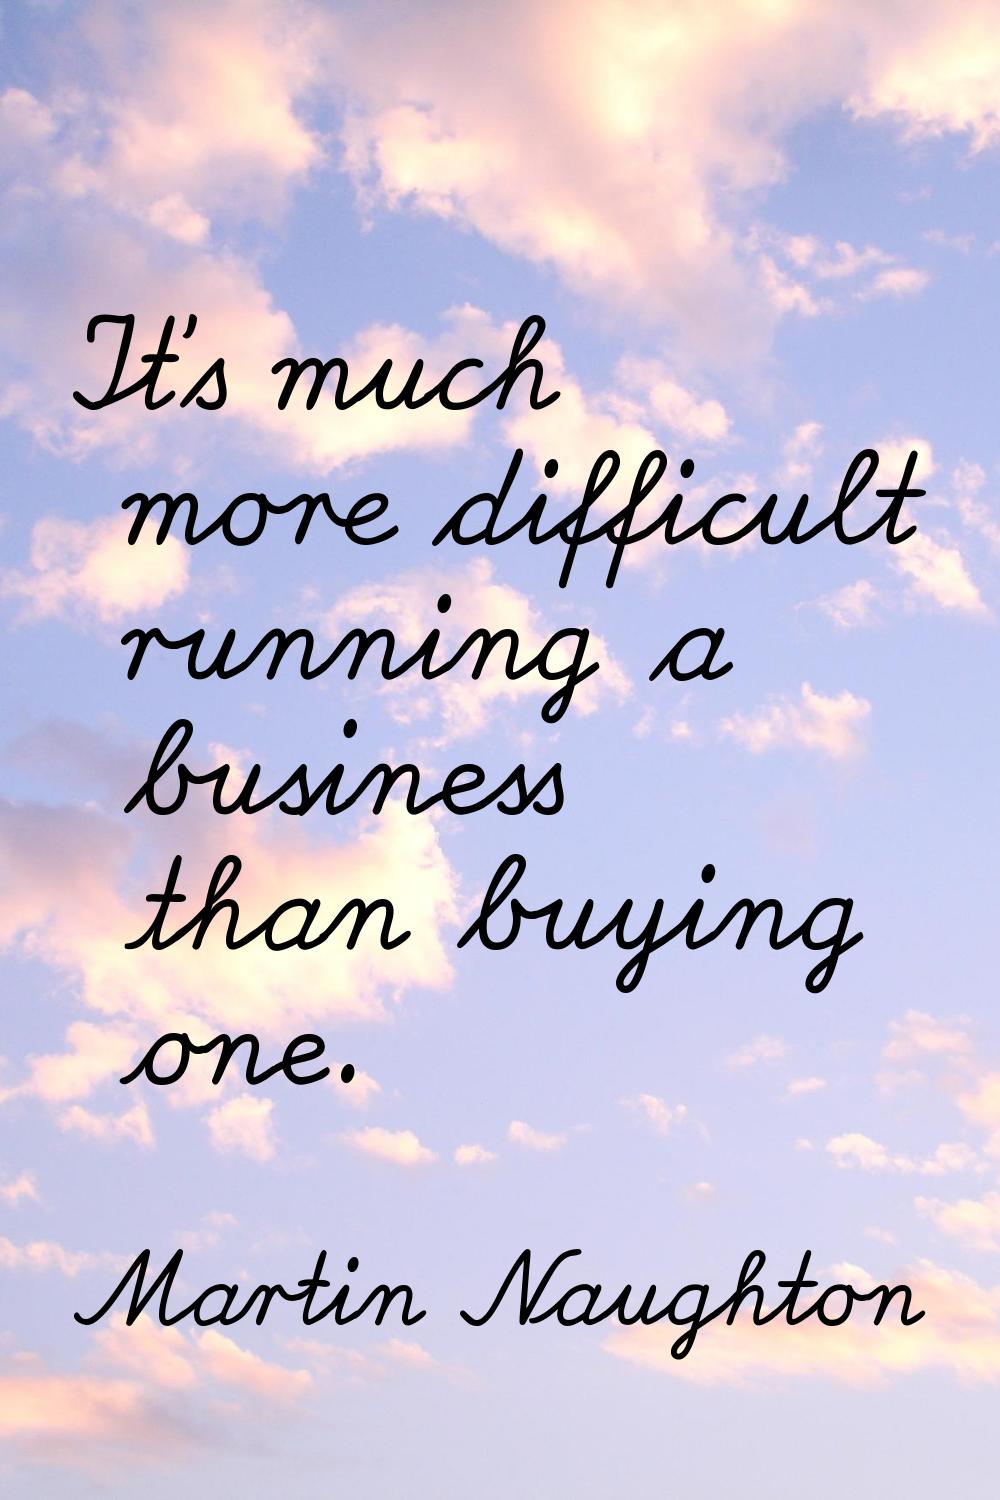 It's much more difficult running a business than buying one.